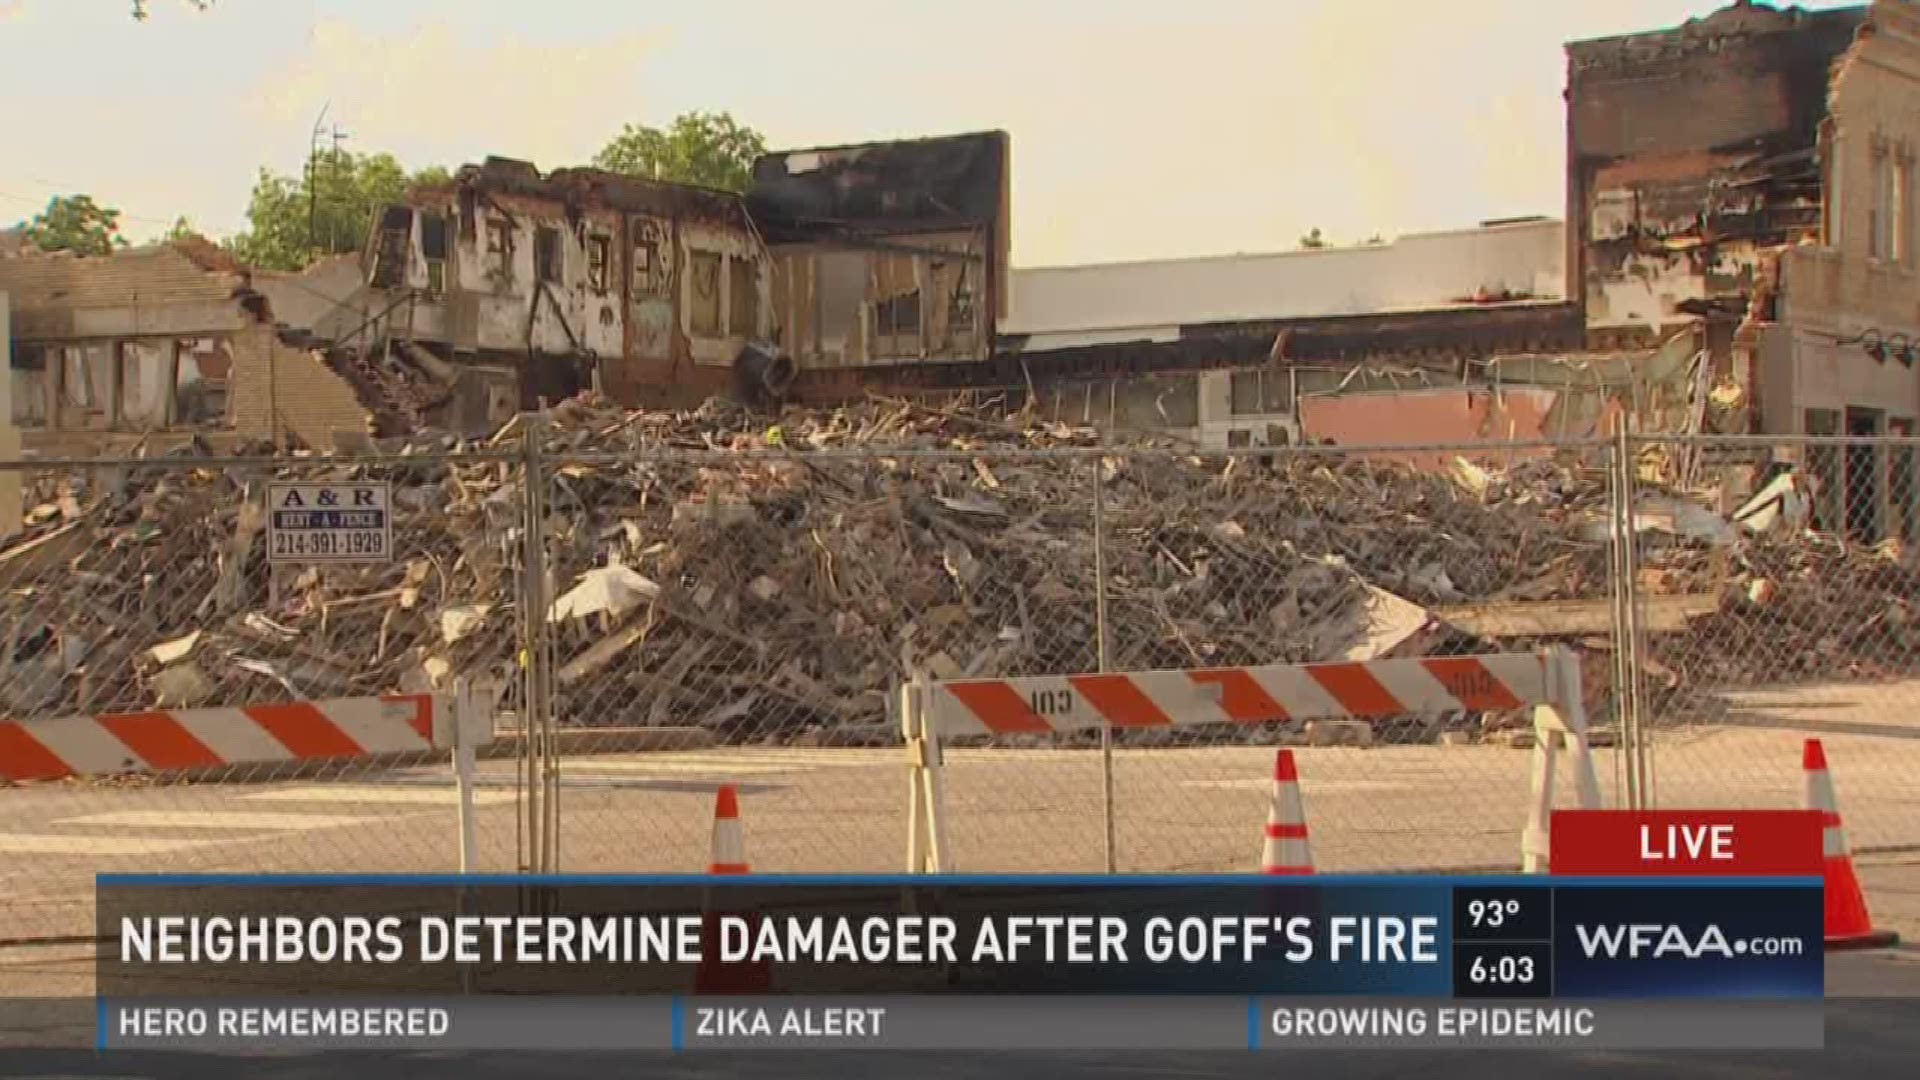 Hannah Davis has the latest on demolition of an iconic hamburger restaurant near SMU after it was destroyed by fire.